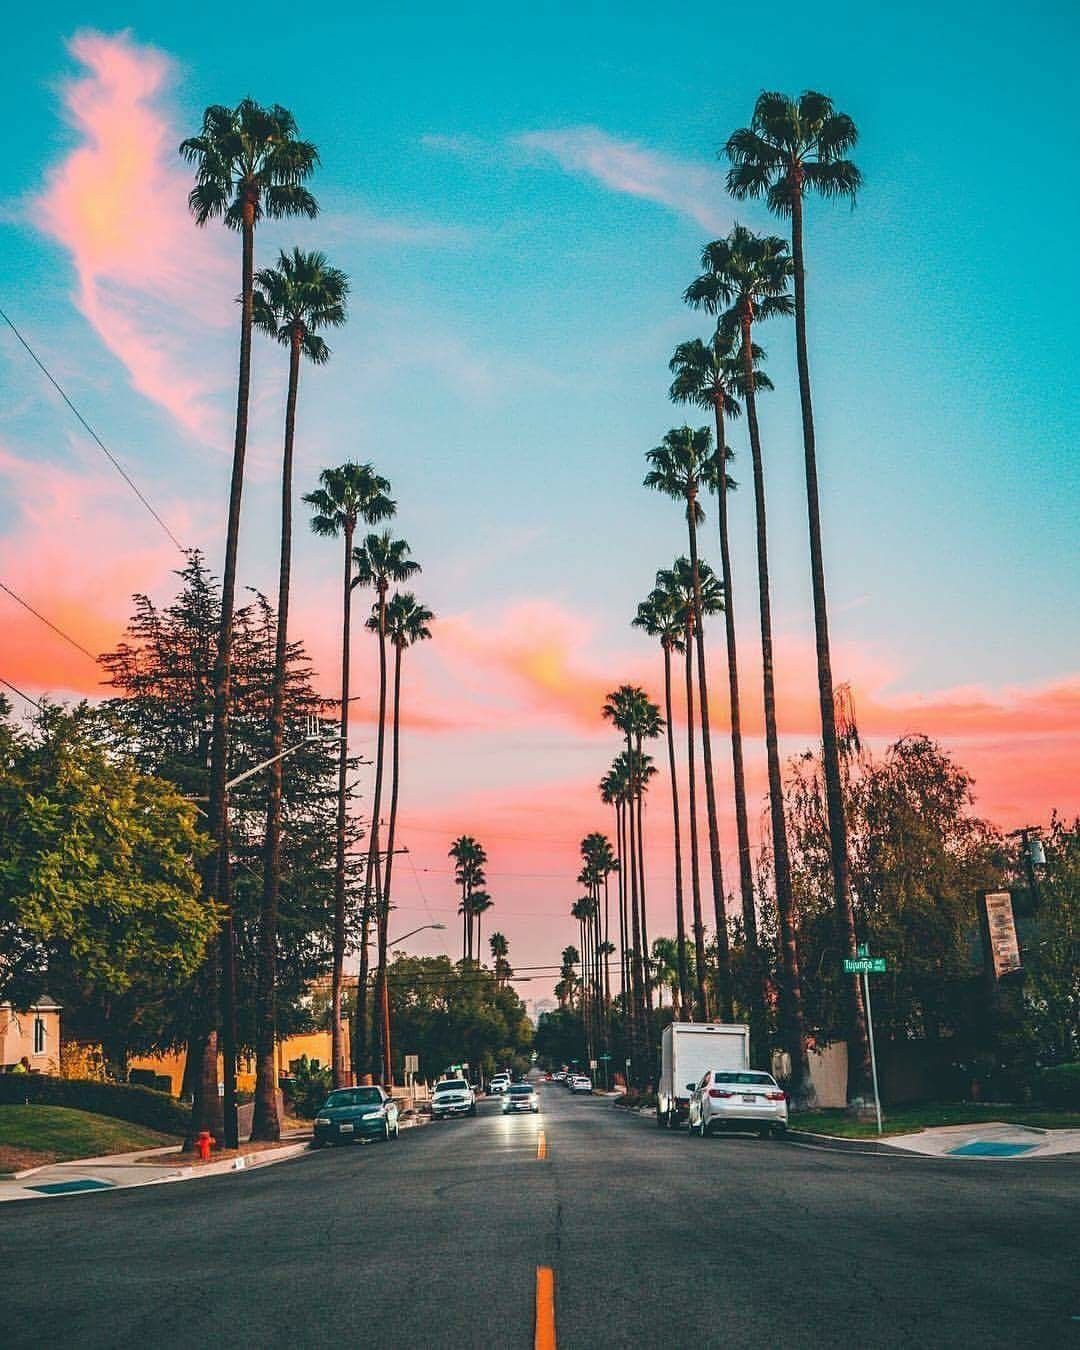 A street lined with palm trees in California - Los Angeles